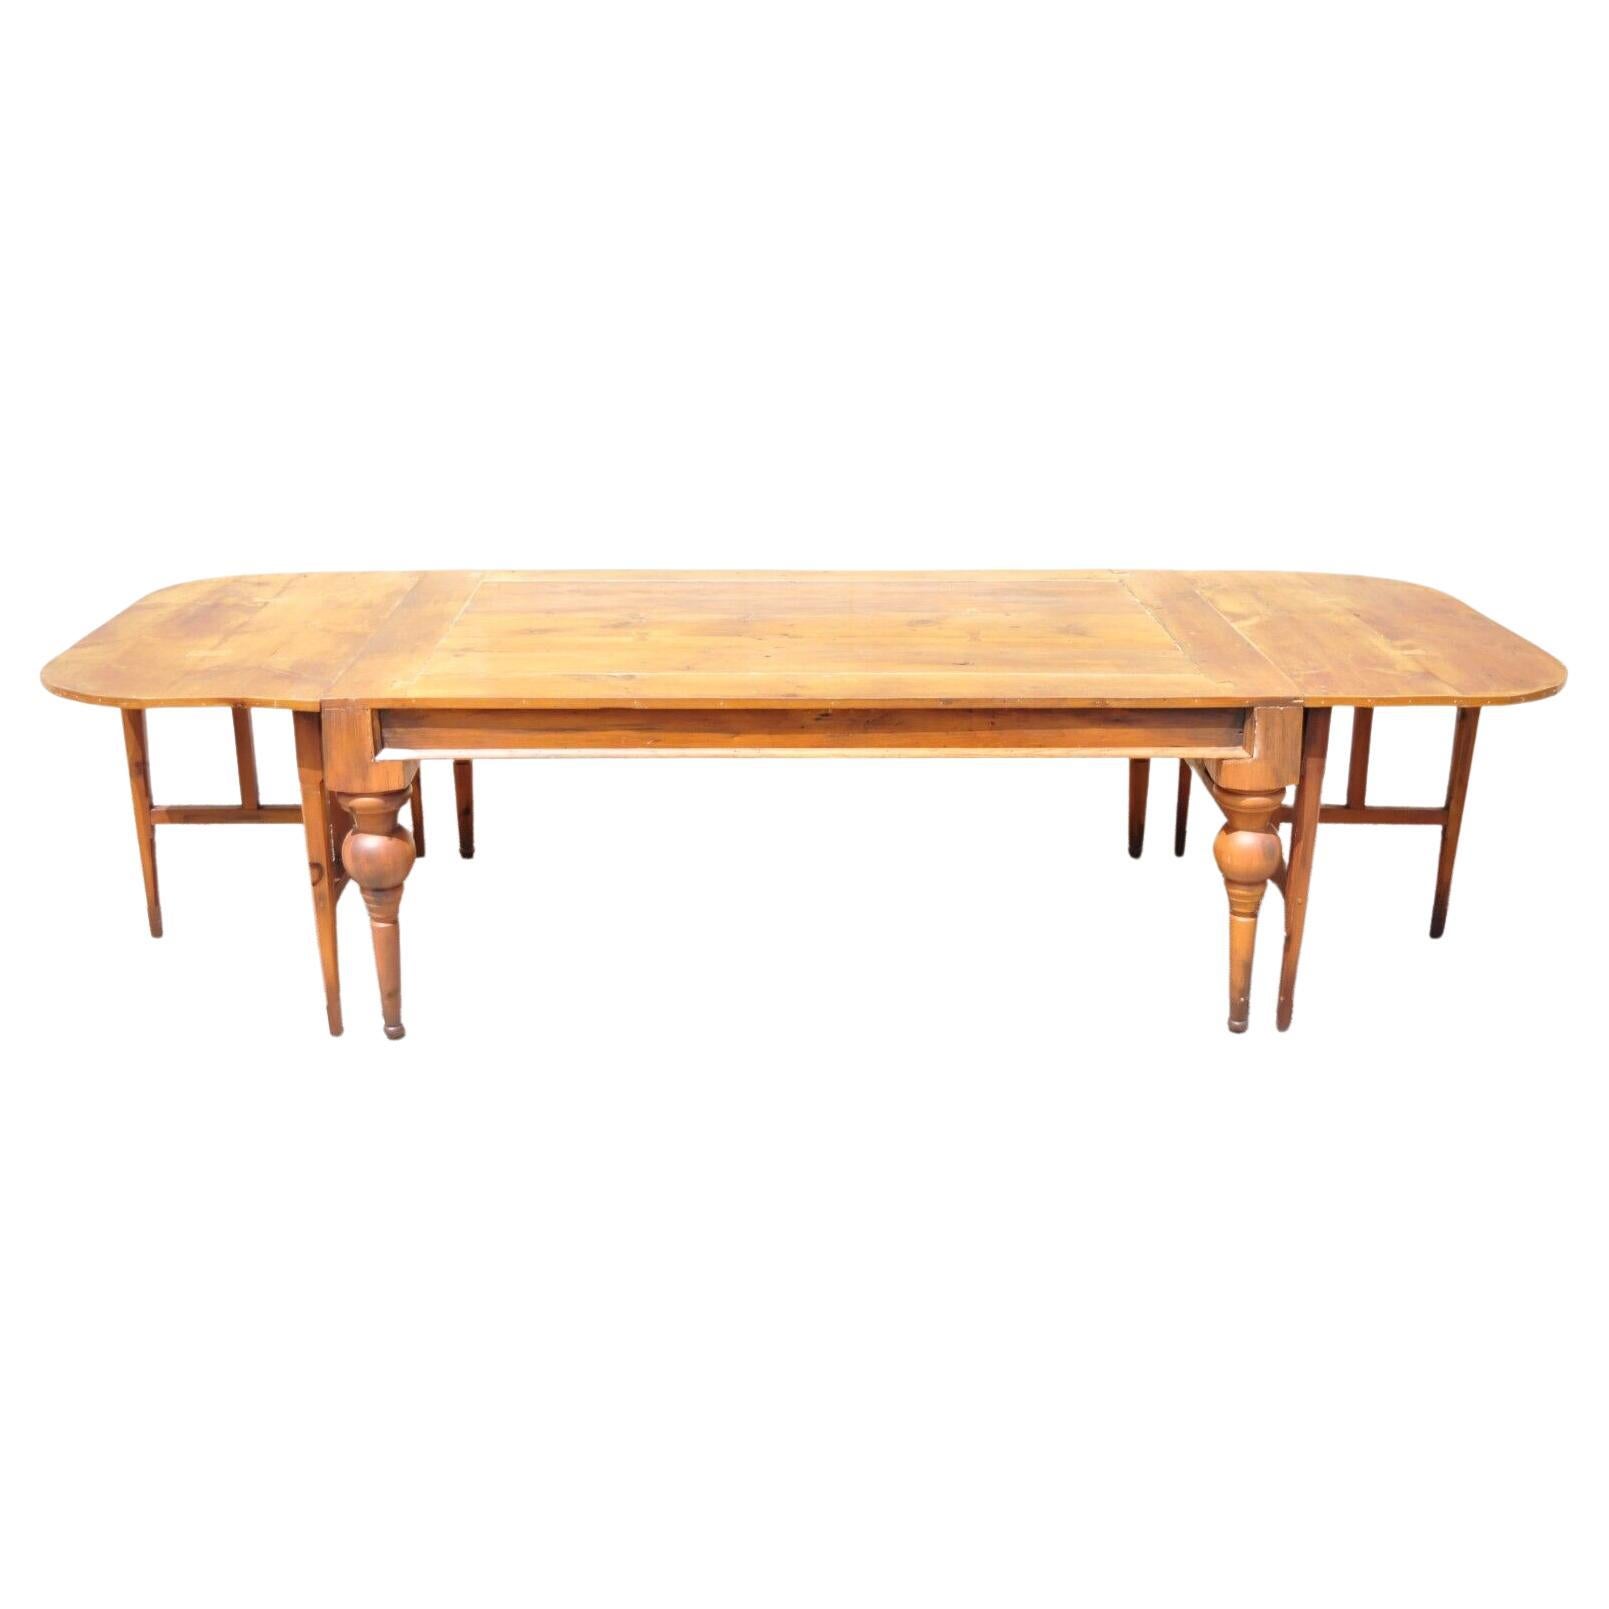 Antique French Provincial Country Farm Large Extension Pine Wood Dining Table For Sale